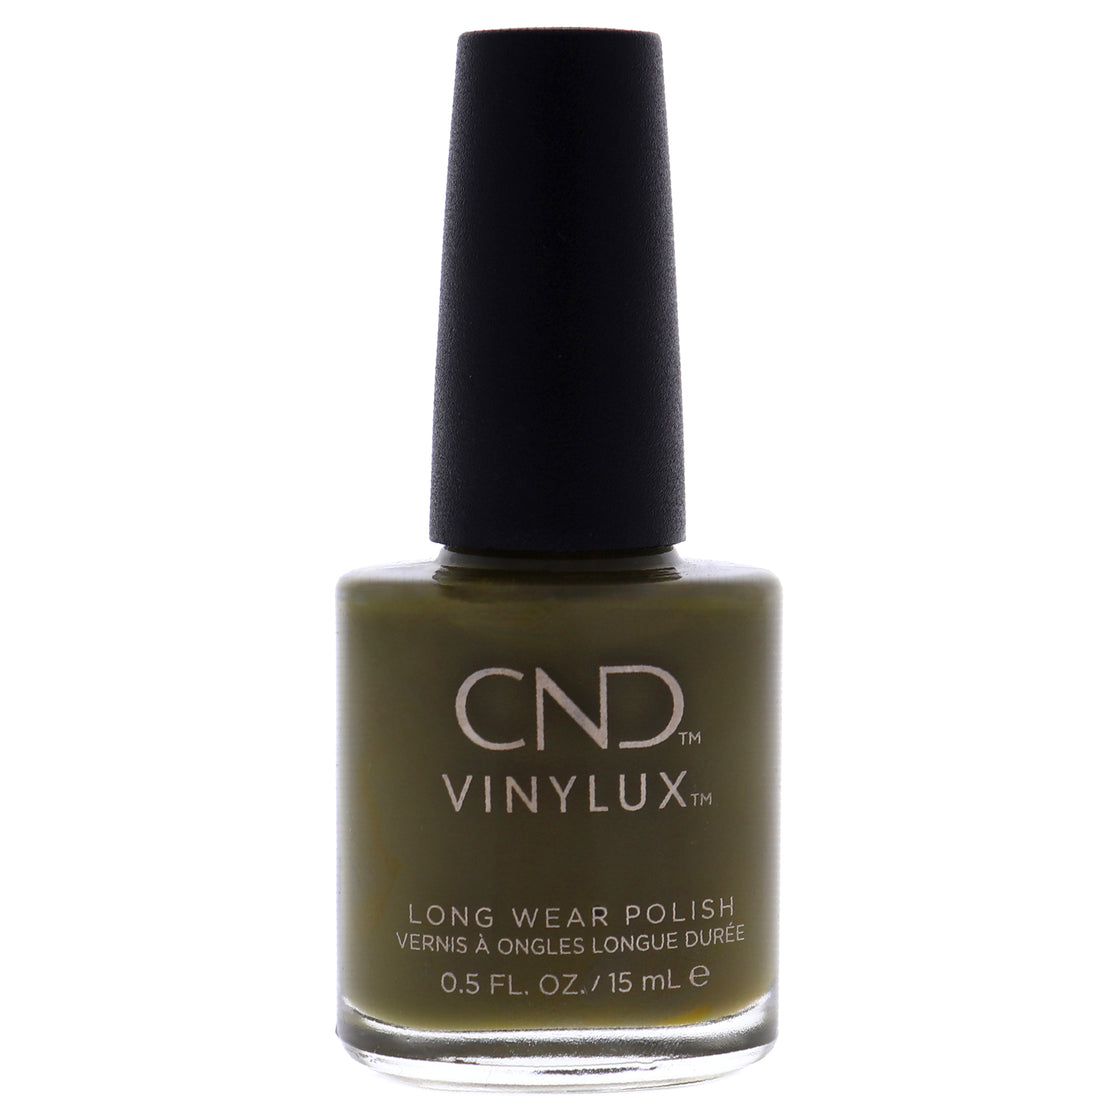 Vinylux Nail Polish - 327 Cap and Gown by CND for Women - 0.5 oz Nail Polish